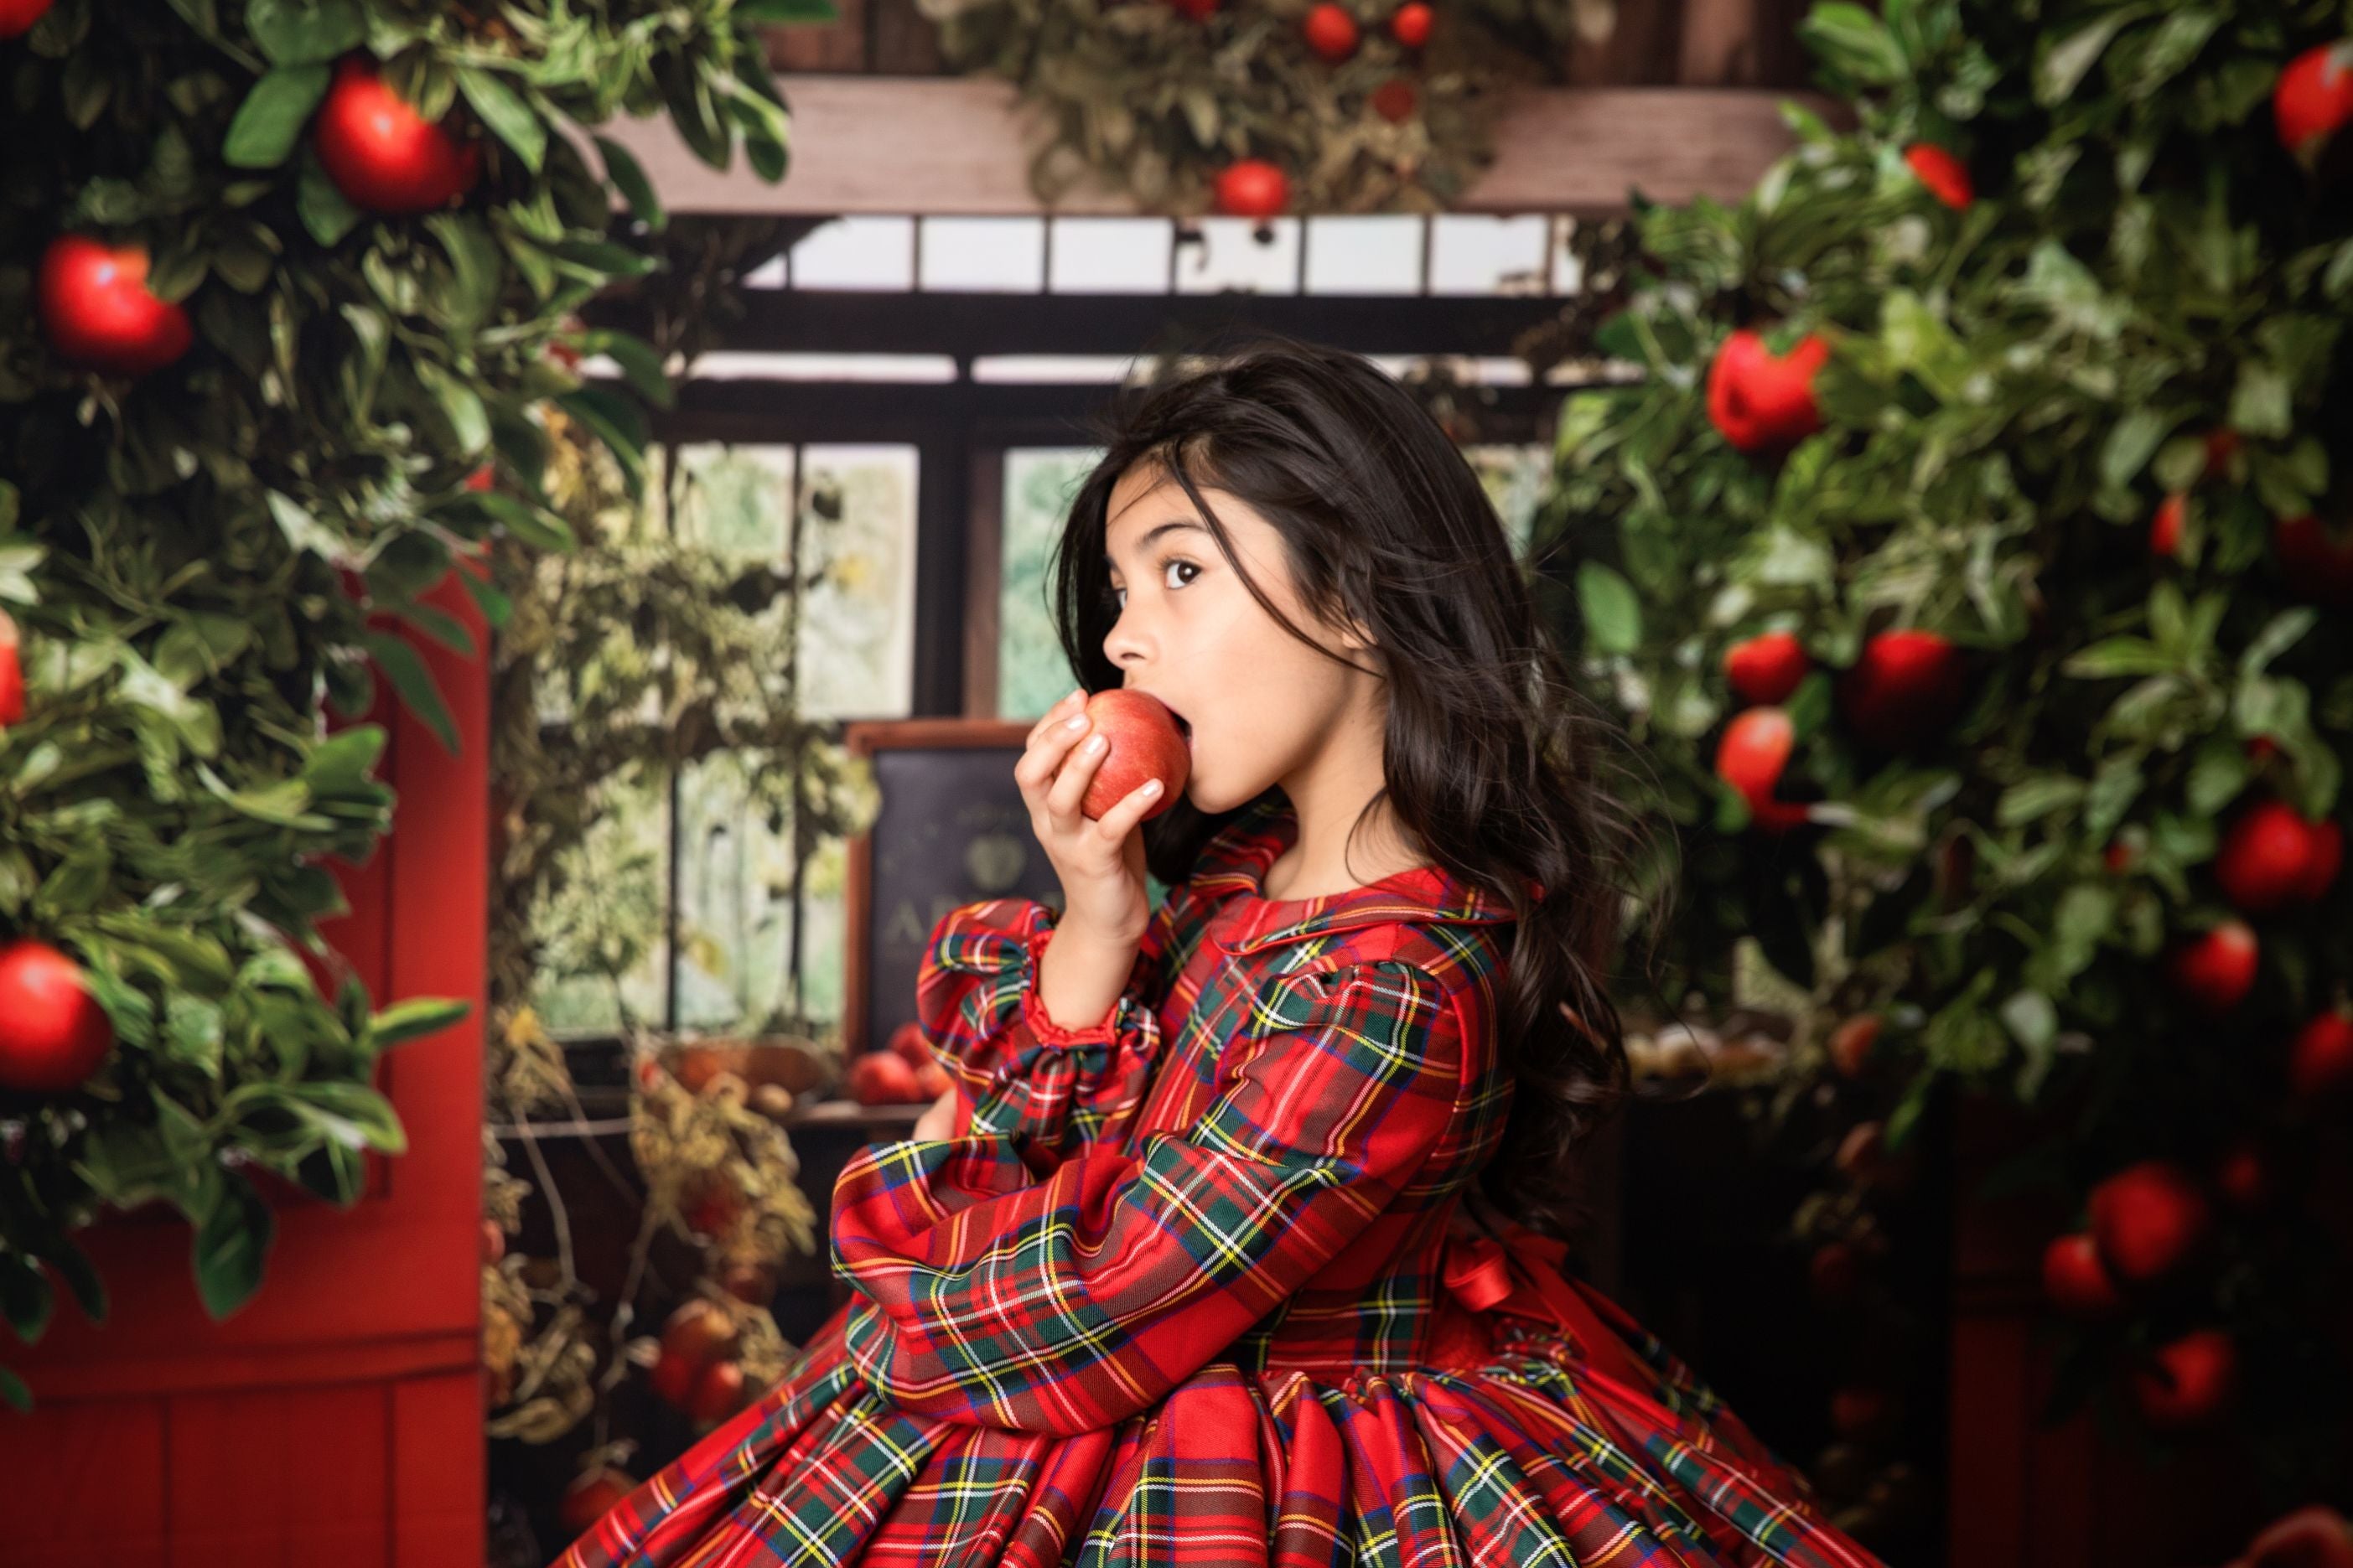 Couture gown rental: "Darling Plaid" Red Vintage Dress Sleeve ( 5 Year - Petite 6 Year)